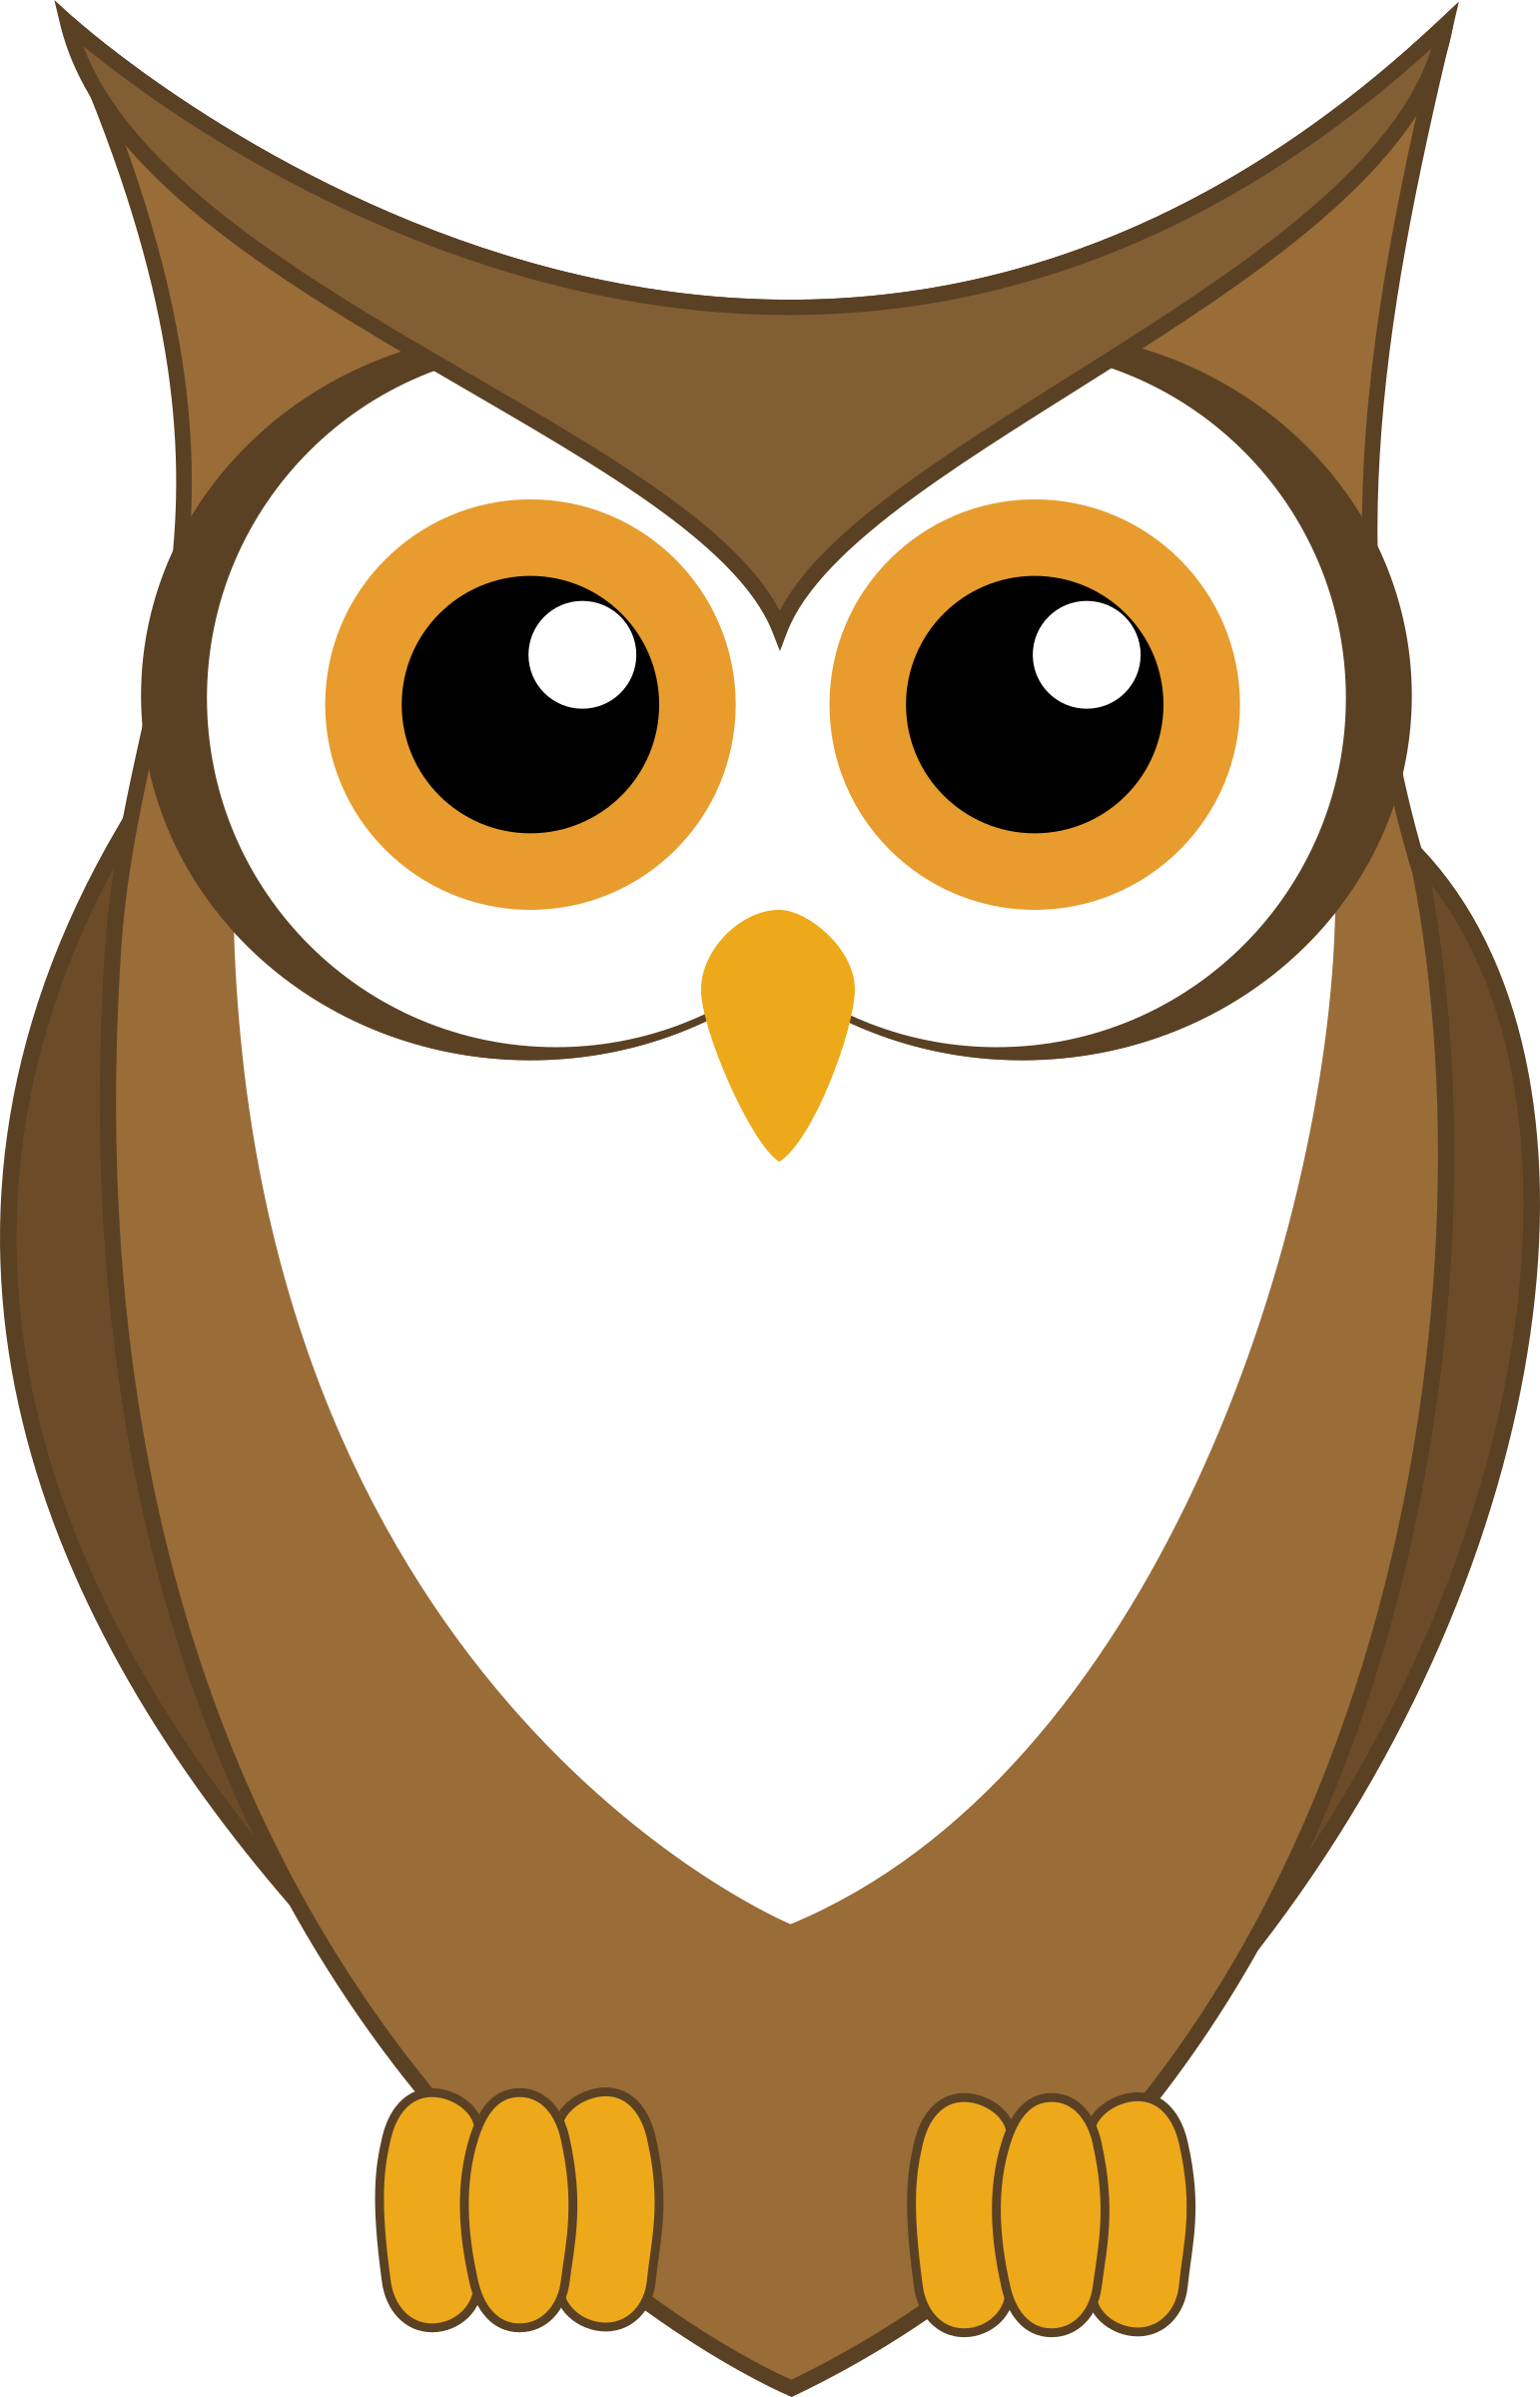 Clipart Of Baby Owl, Clipart Of Cute Owls, Clipart - Owl Vector (1542x2400)